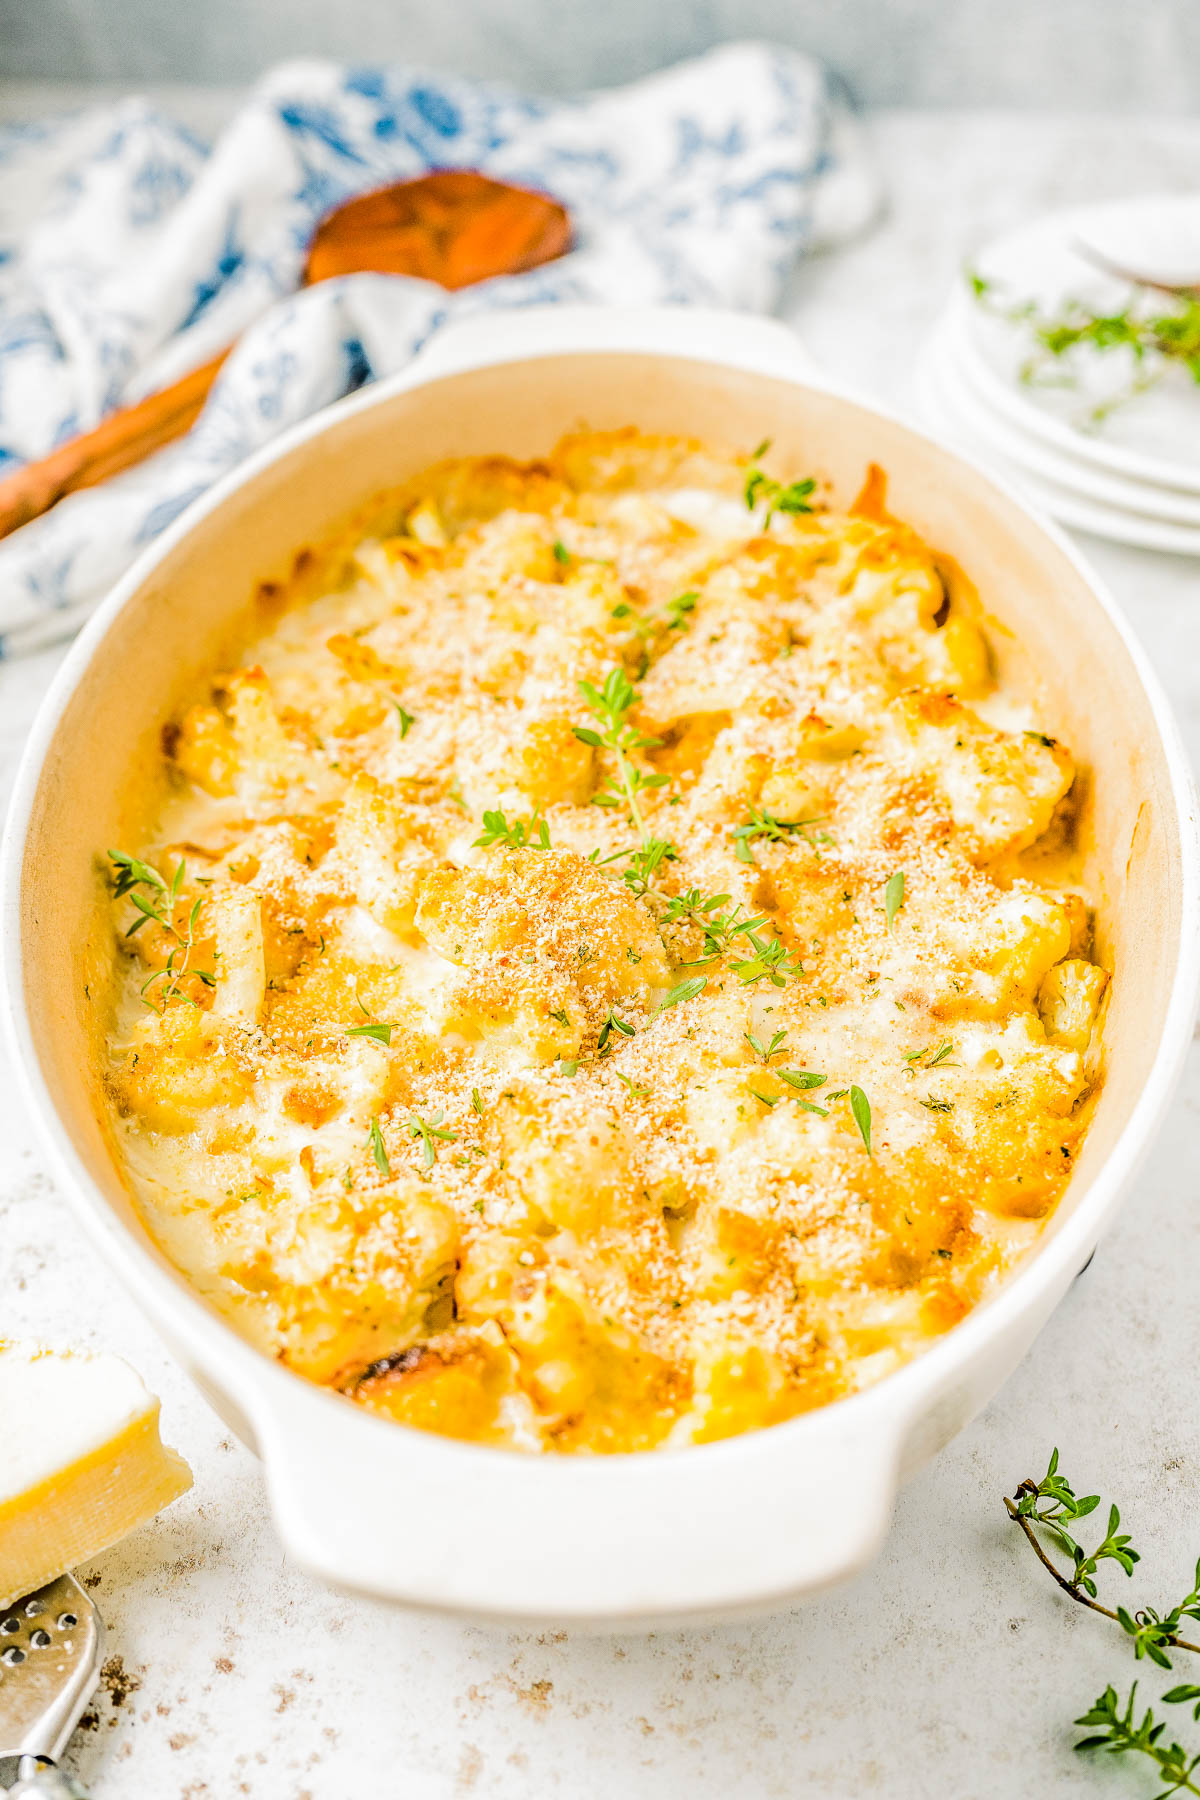 Cheesy Cauliflower Gratin — Cauliflower florets are coated in a creamy cheese sauce and sprinkled with a crispy panko breadcrumb topping before being baked to golden, bubbly perfection! This is an EASY yet ELEGANT side dish that’s perfect for busy weeknights and holiday meals alike including Thanksgiving, Christmas, or New Year's Eve! 